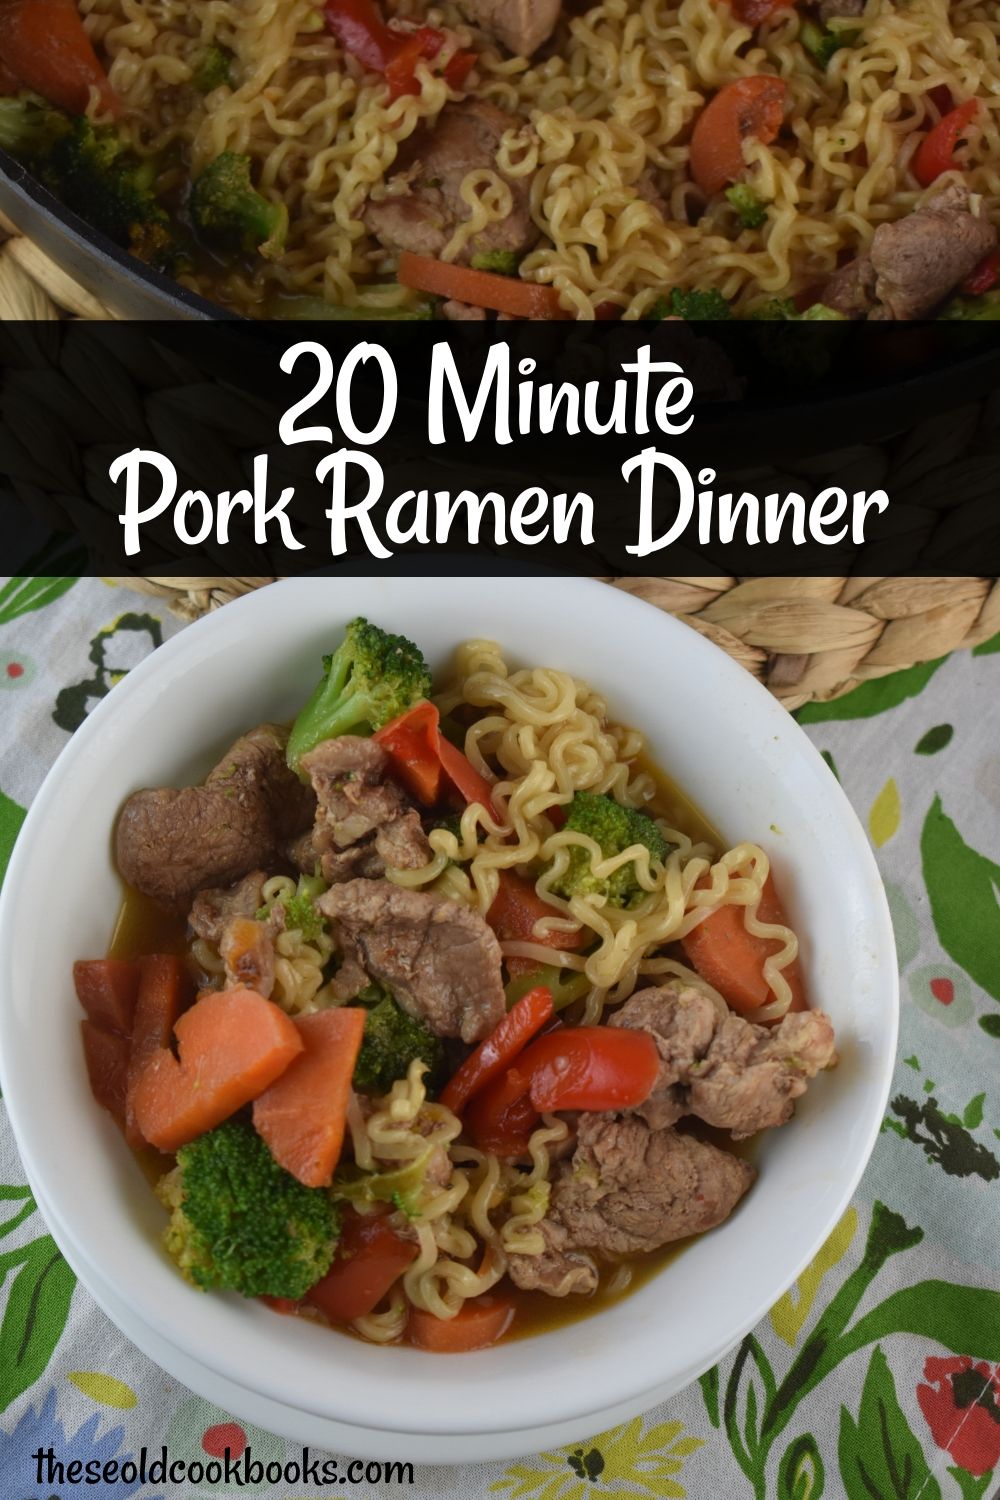 Pork Ramen Dinner is an easy stir-fry skillet meal that can be on the table in twenty minutes.  Budget-friendly ramen packets are transformed into a delicious and nutritious meal. 